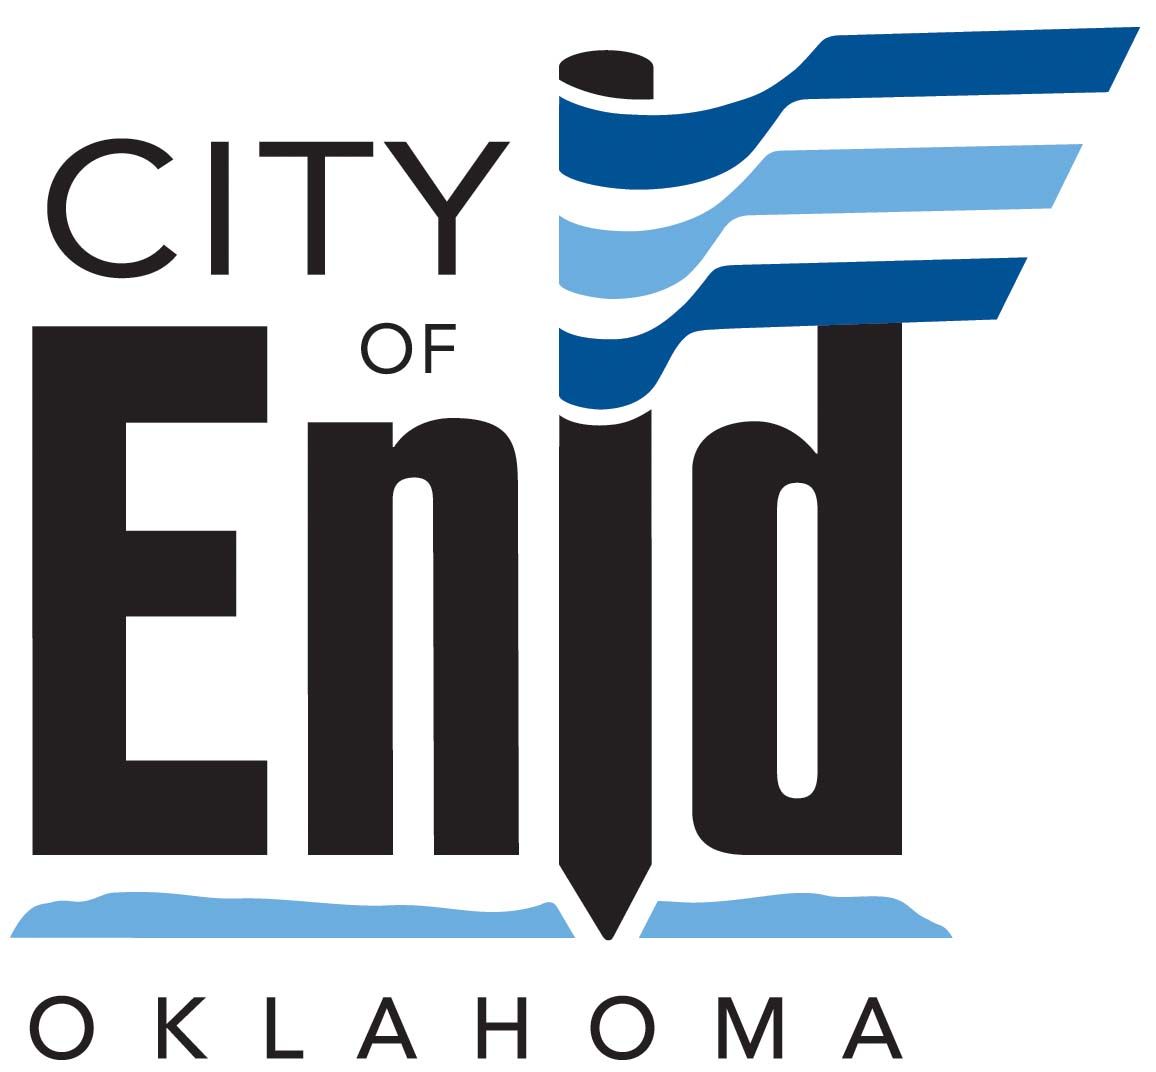 City commission lowers speed limit in 3-2 vote - Enidnews.com ...